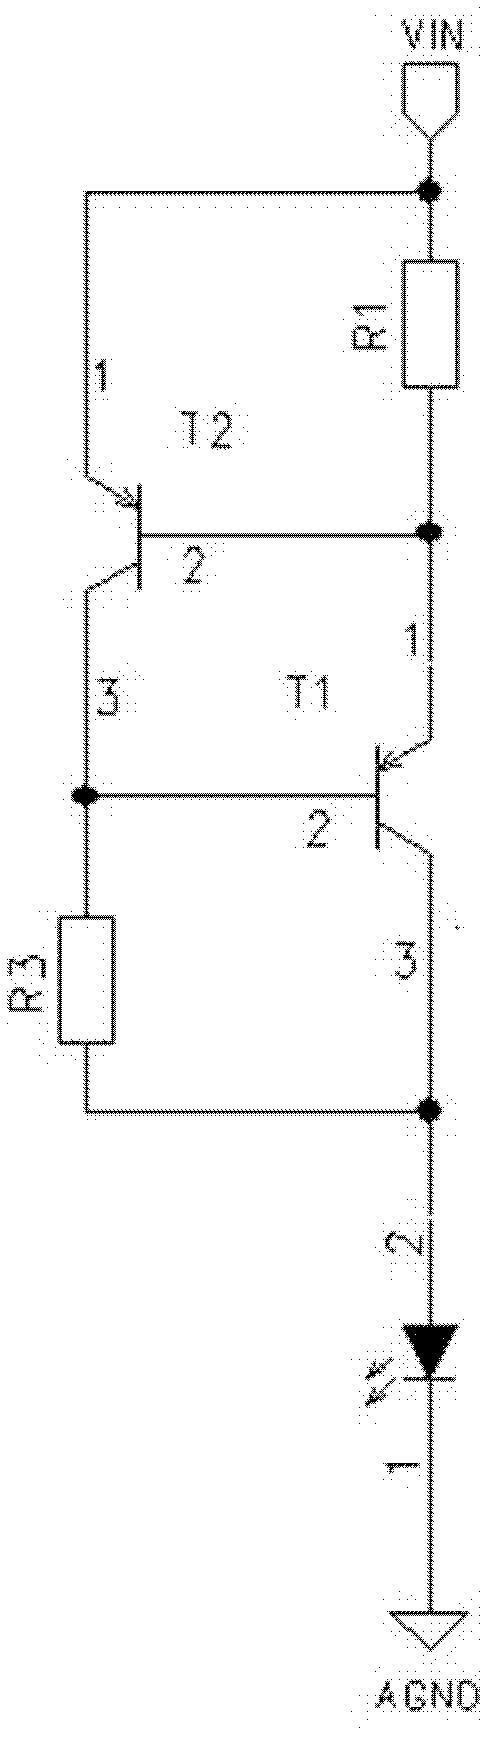 Constant current source circuit and sampling circuit